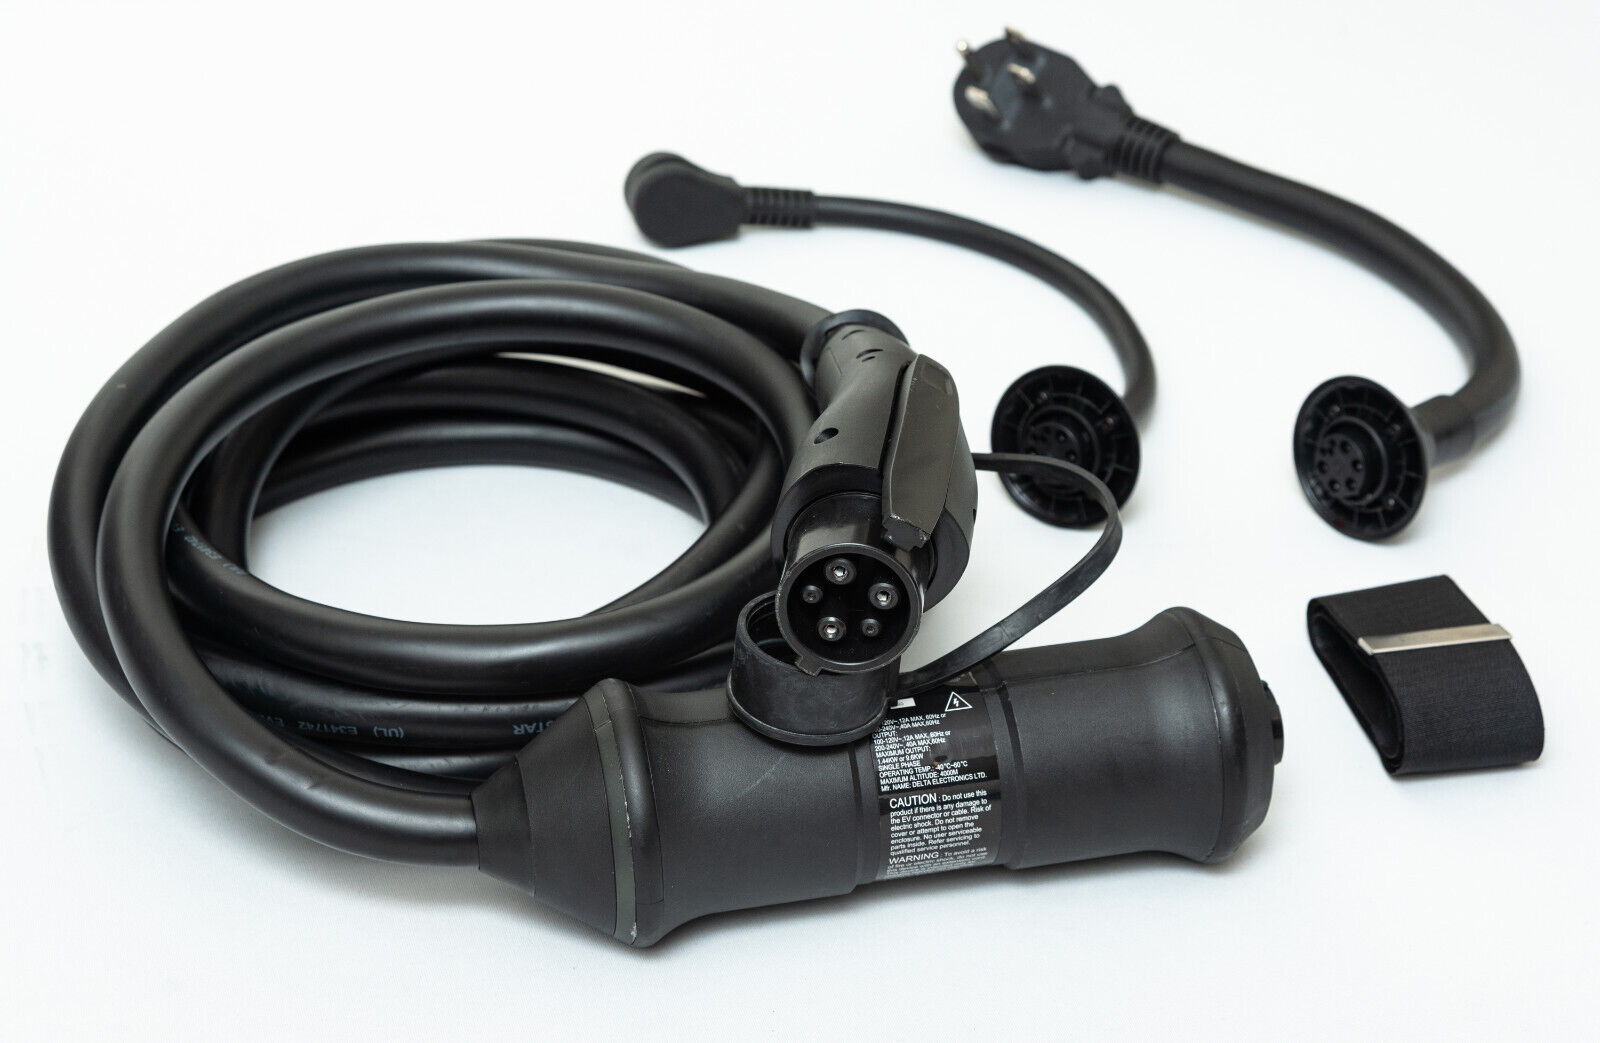 Polestar/Volvo EV Charging Cable Mode 2 Dual Voltage Charger (no adapter caps)